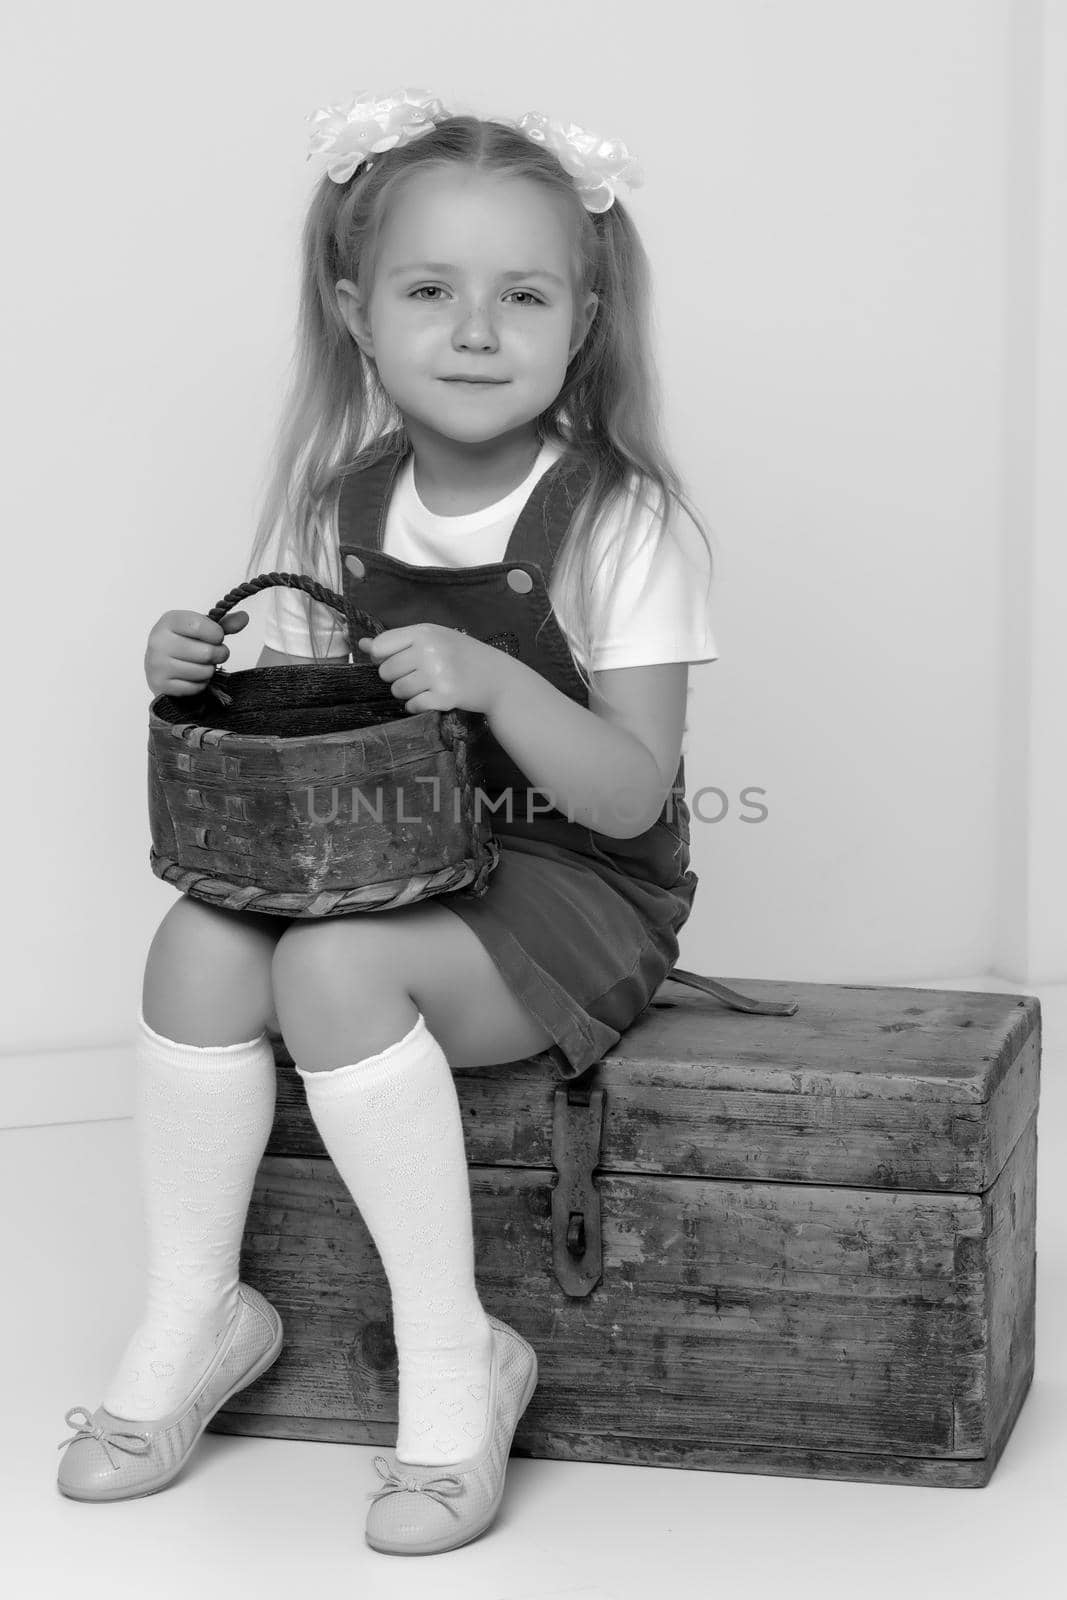 A little girl is sitting on an old suitcase with a basket in her hands. Retro style.